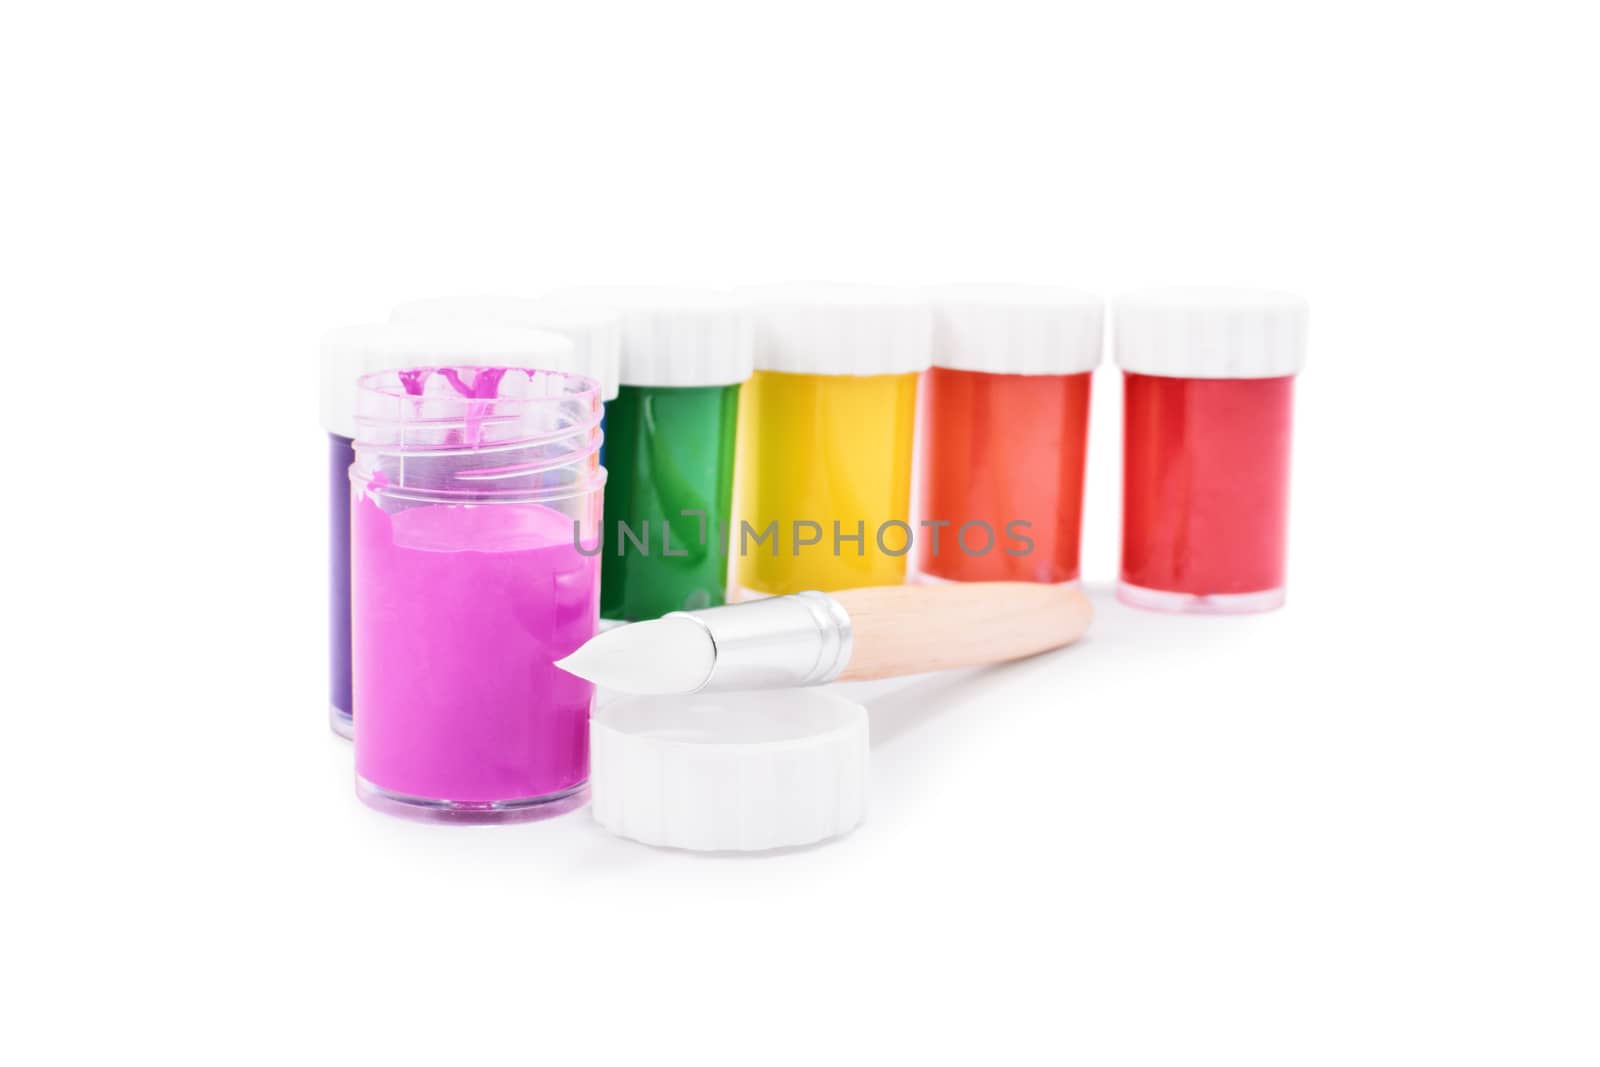 Color paint containers and a paint brush, isolated on white background.